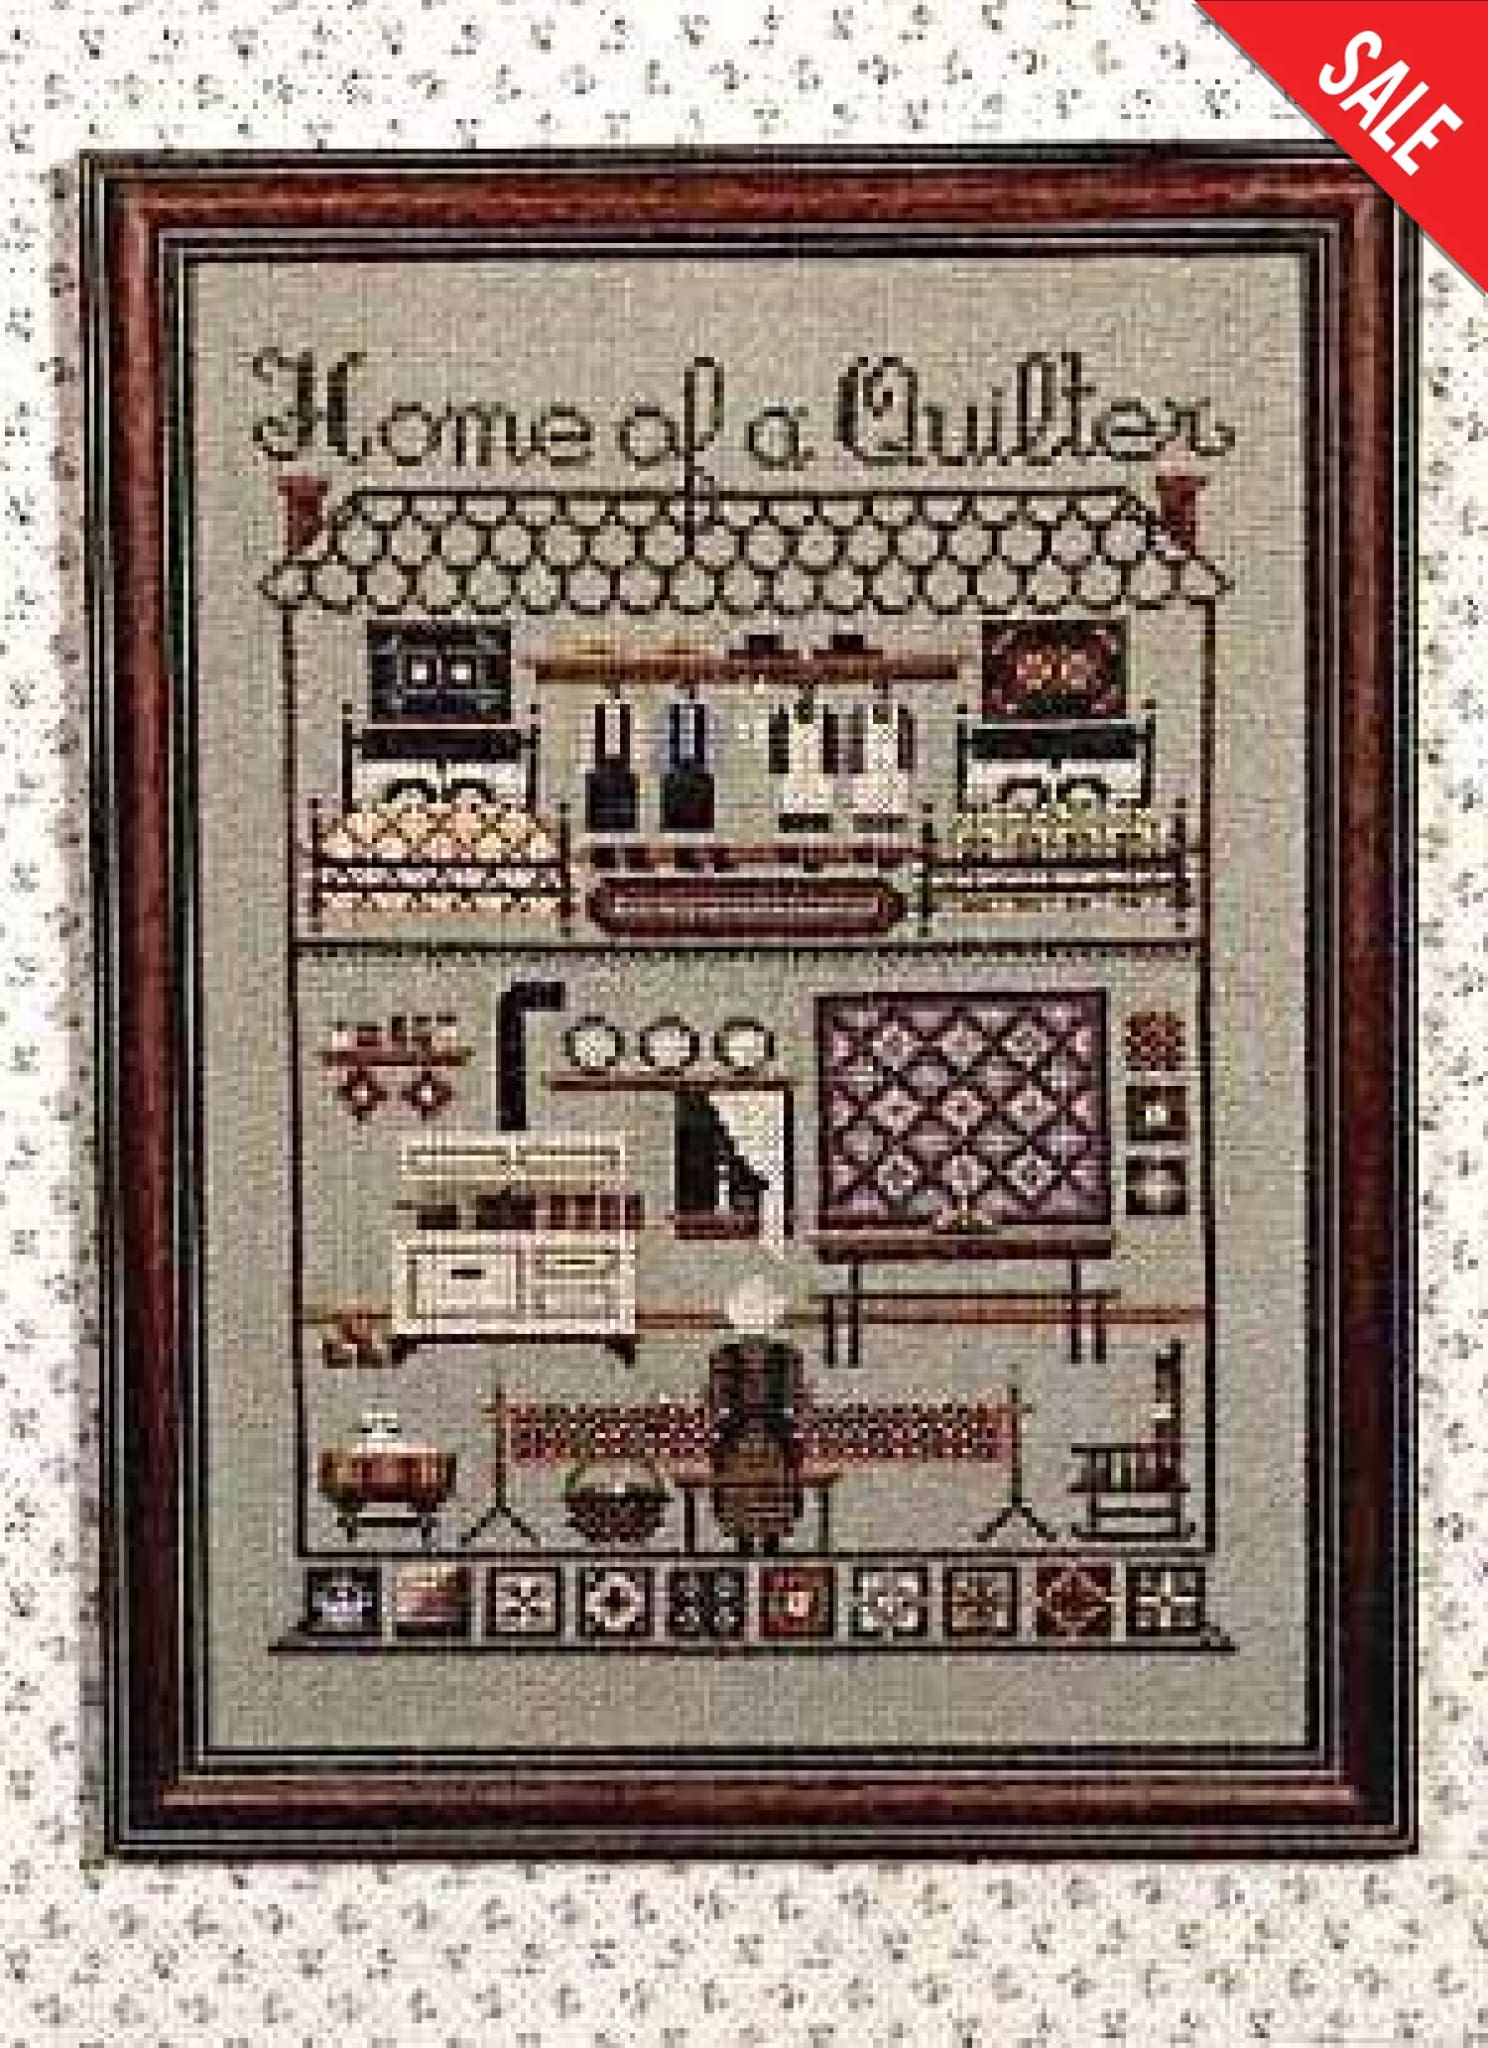 Told In A Garden Home Of A Quilter TG17 Amish cross stitch pattern